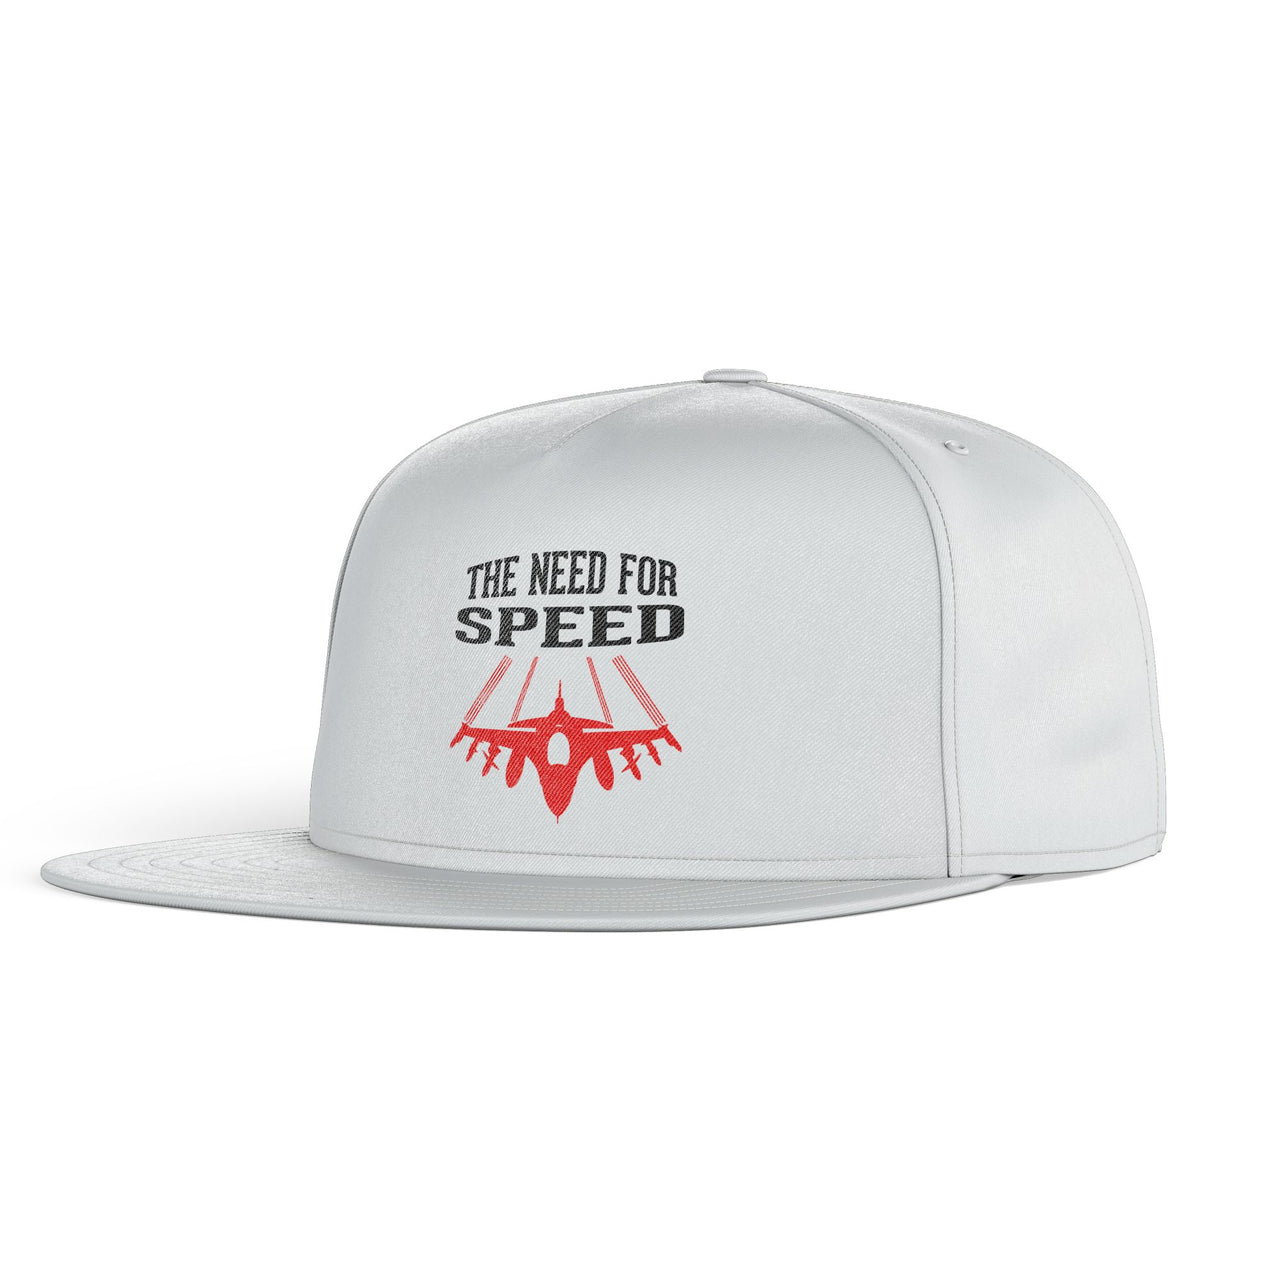 The Need For Speed Designed Snapback Caps & Hats